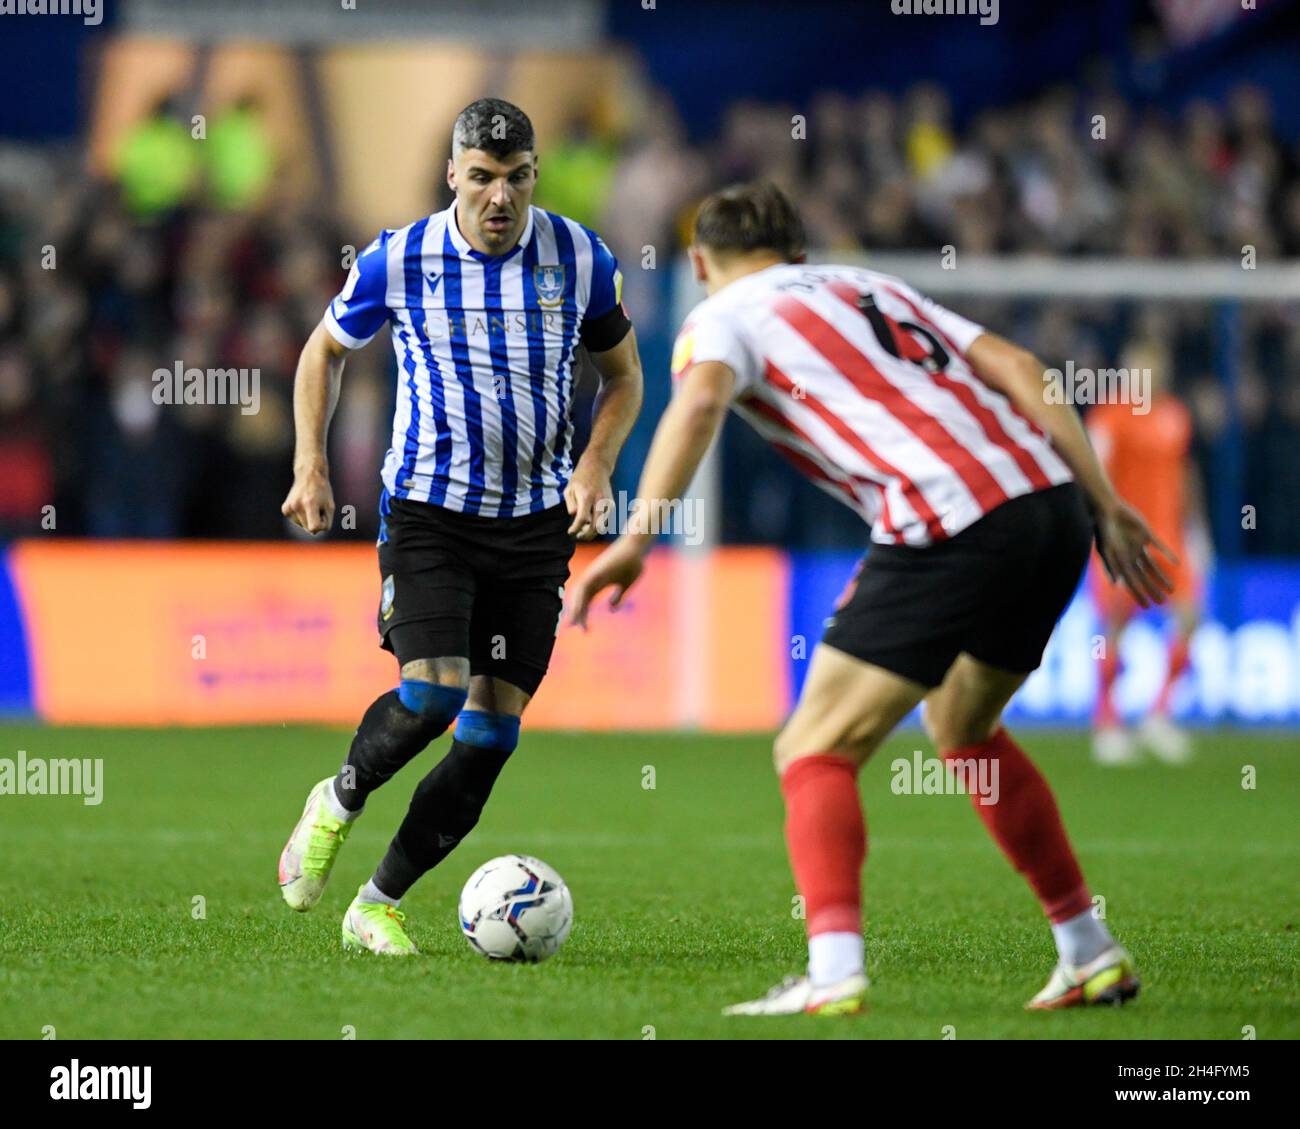 Sheffield, UK. 02nd Nov, 2021. Callum Paterson #13 of Sheffield Wednesday looks for a way past Callum Doyle #6 of Sunderland in Sheffield, United Kingdom on 11/2/2021. (Photo by Simon Whitehead/News Images/Sipa USA) Credit: Sipa USA/Alamy Live News Stock Photo